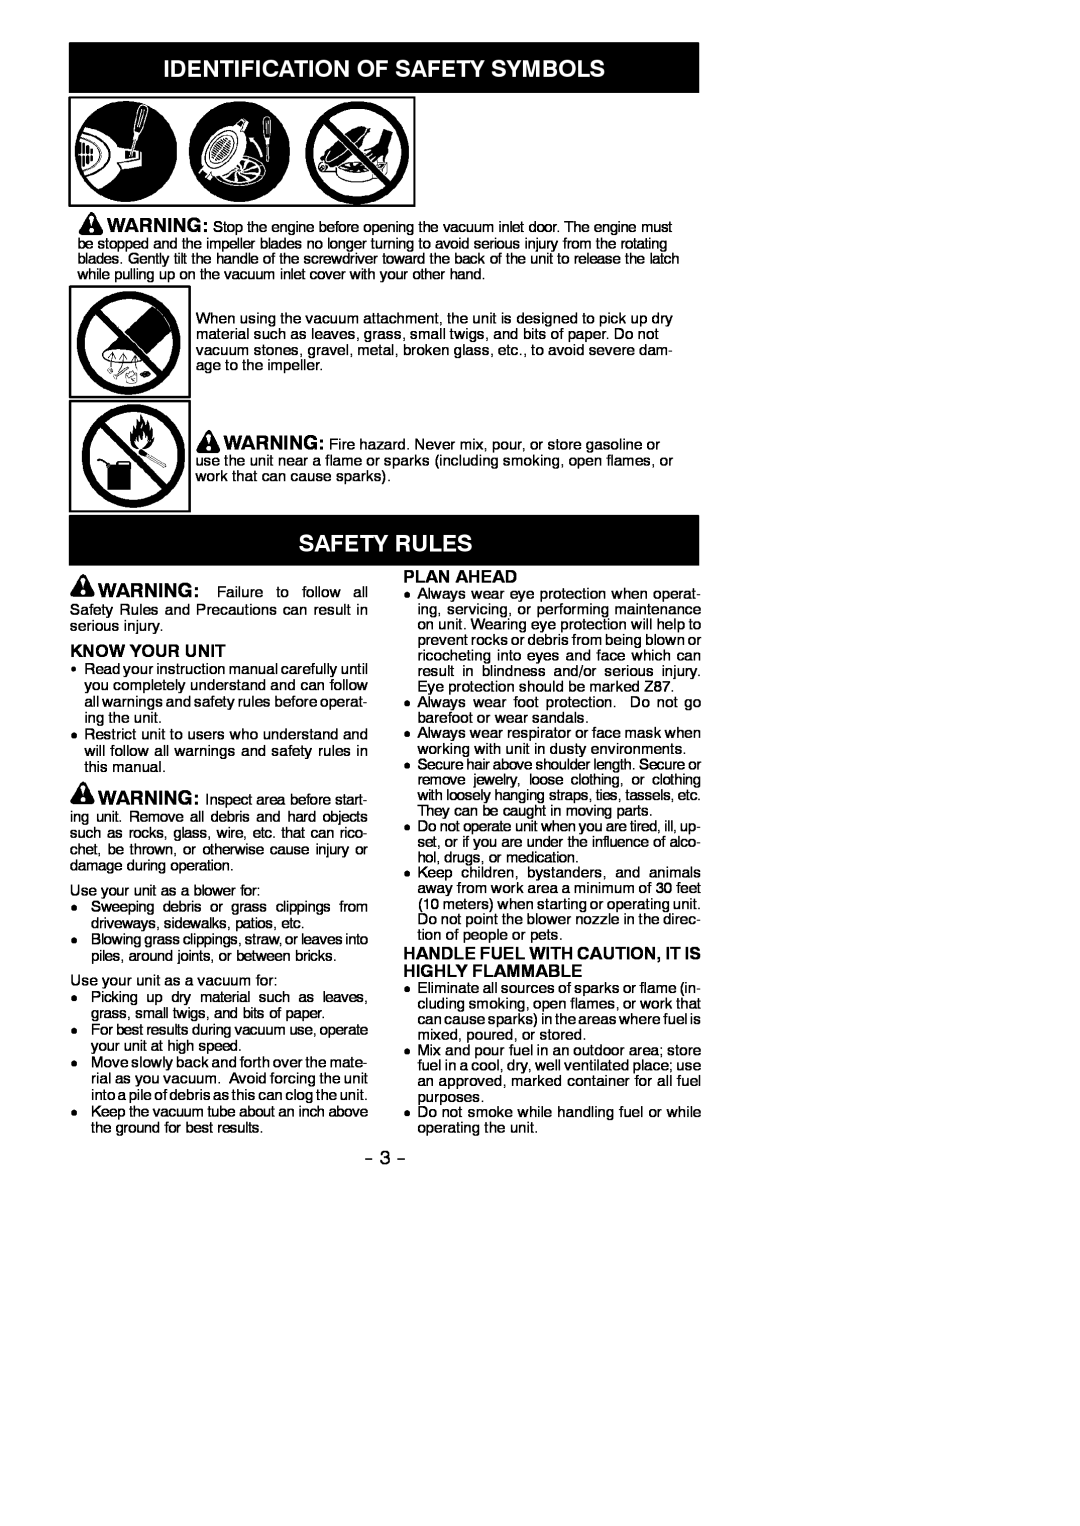 Poulan 545137223 instruction manual Safety Rules, Identification Of Safety Symbols, Know Your Unit, Plan Ahead 